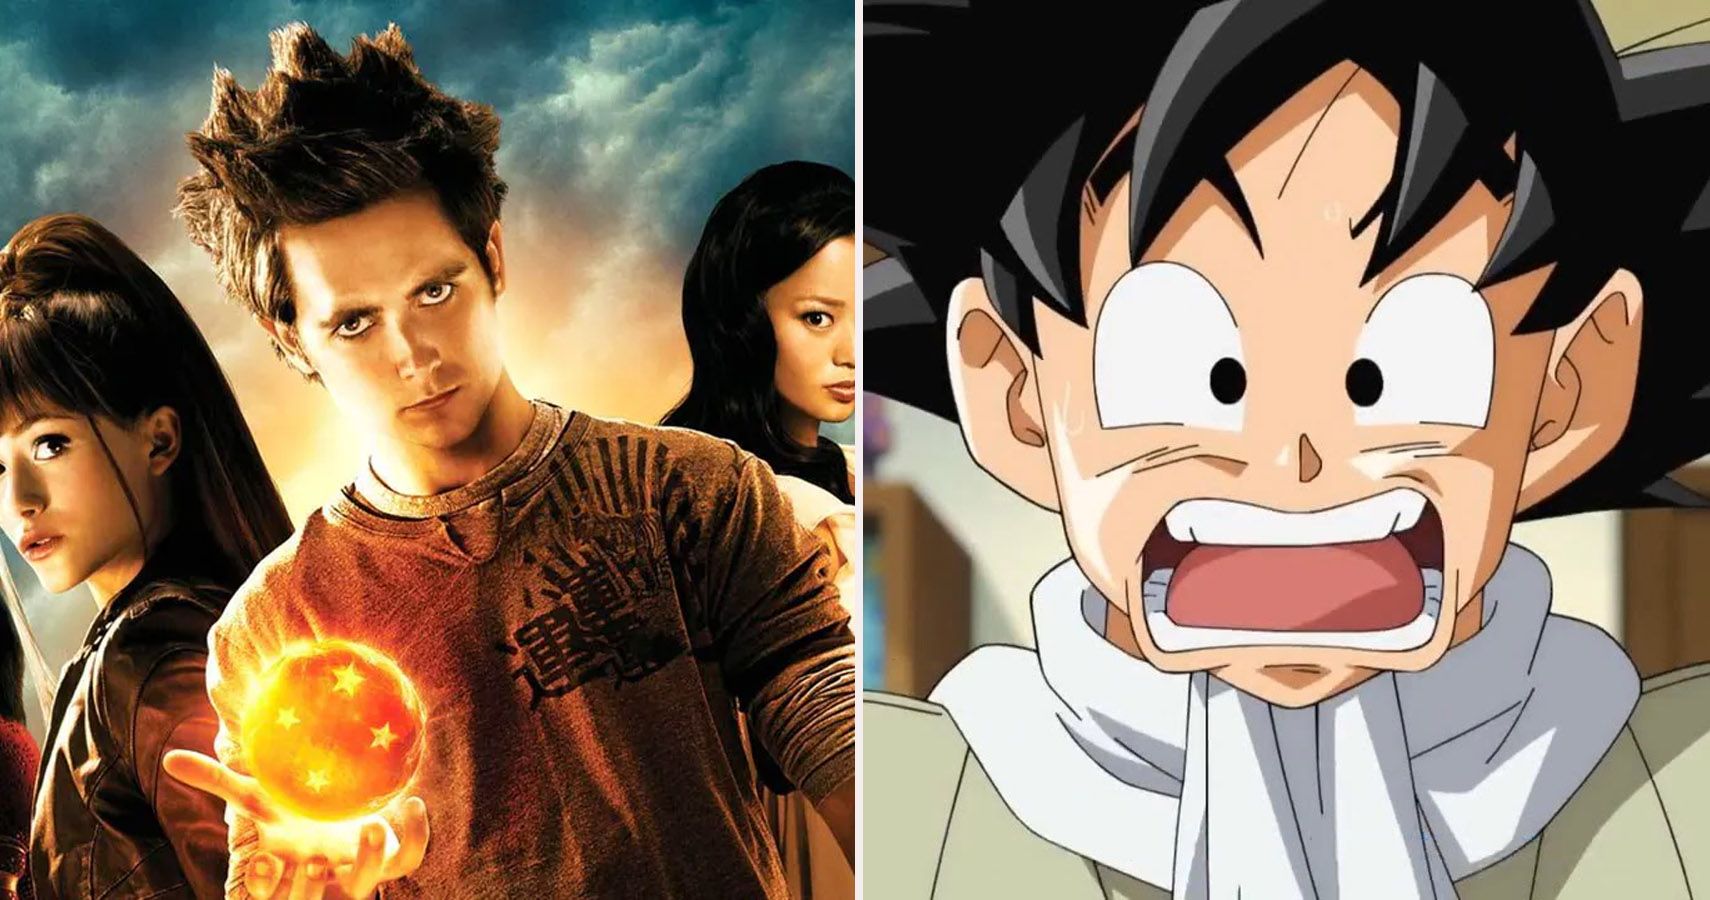 Dragonball: Evolution is one of the best-worst movies ever